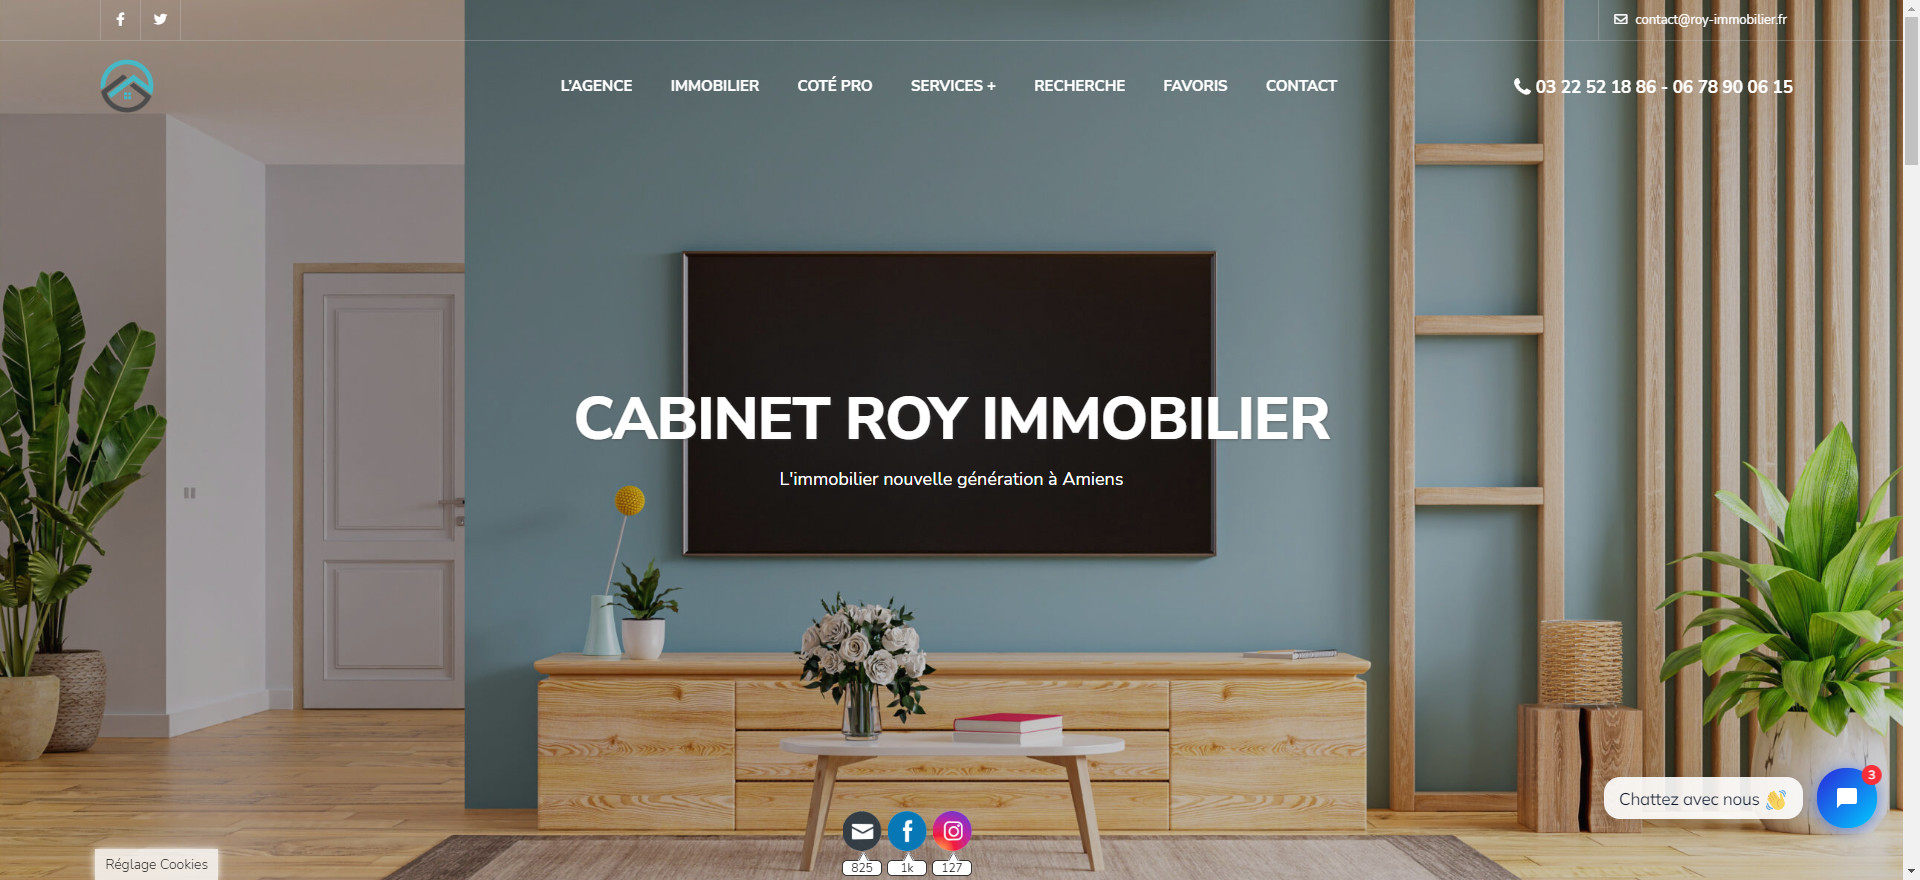 Image site web Cabinet Roy Immobilier